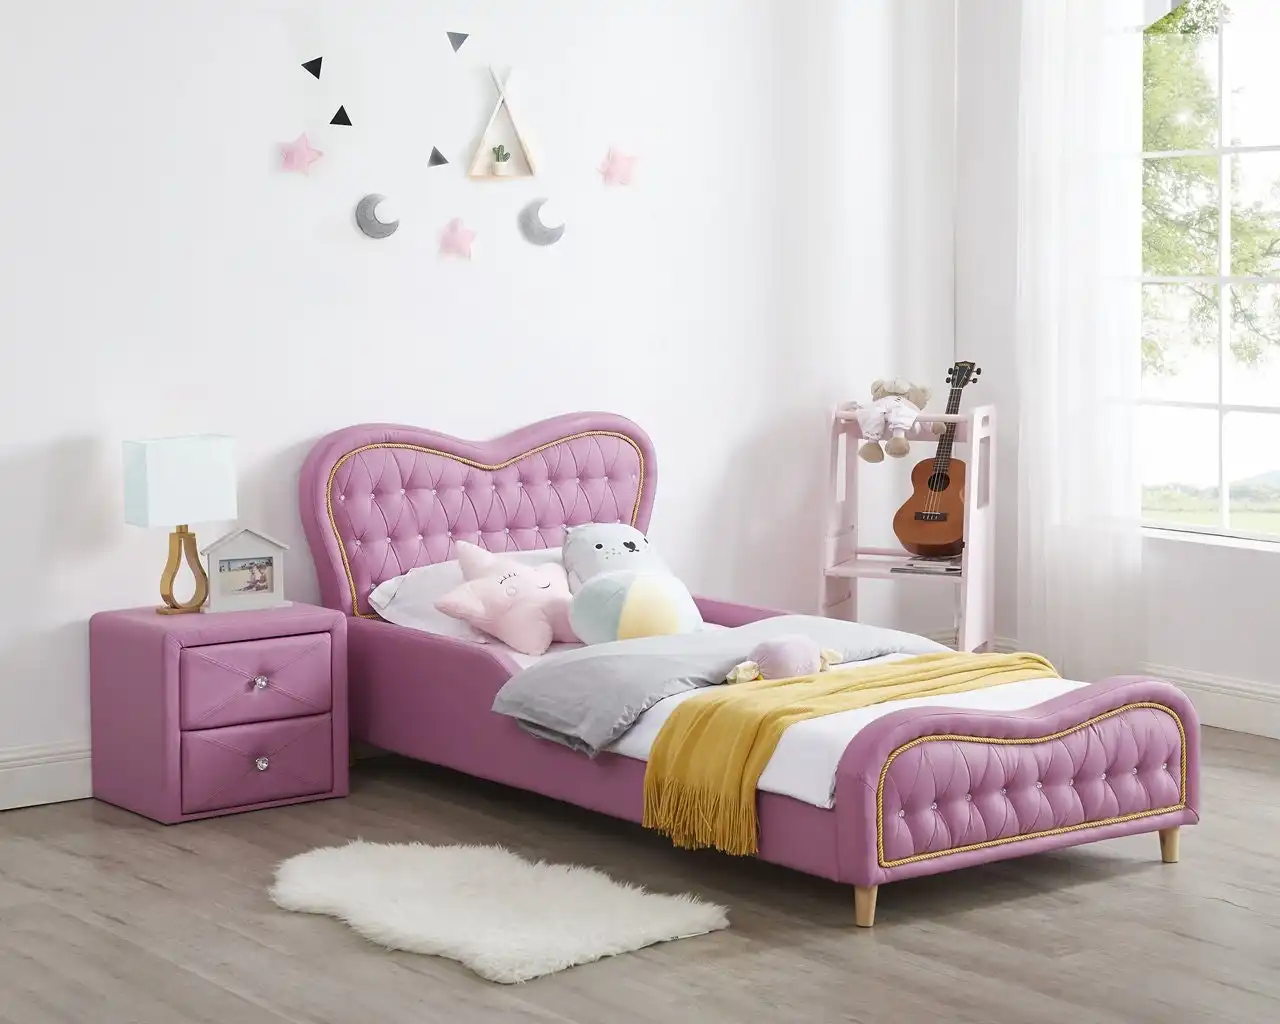 All 4 Kids Brooklyn Heart PU Leather Single Upholstered Bed - Pink